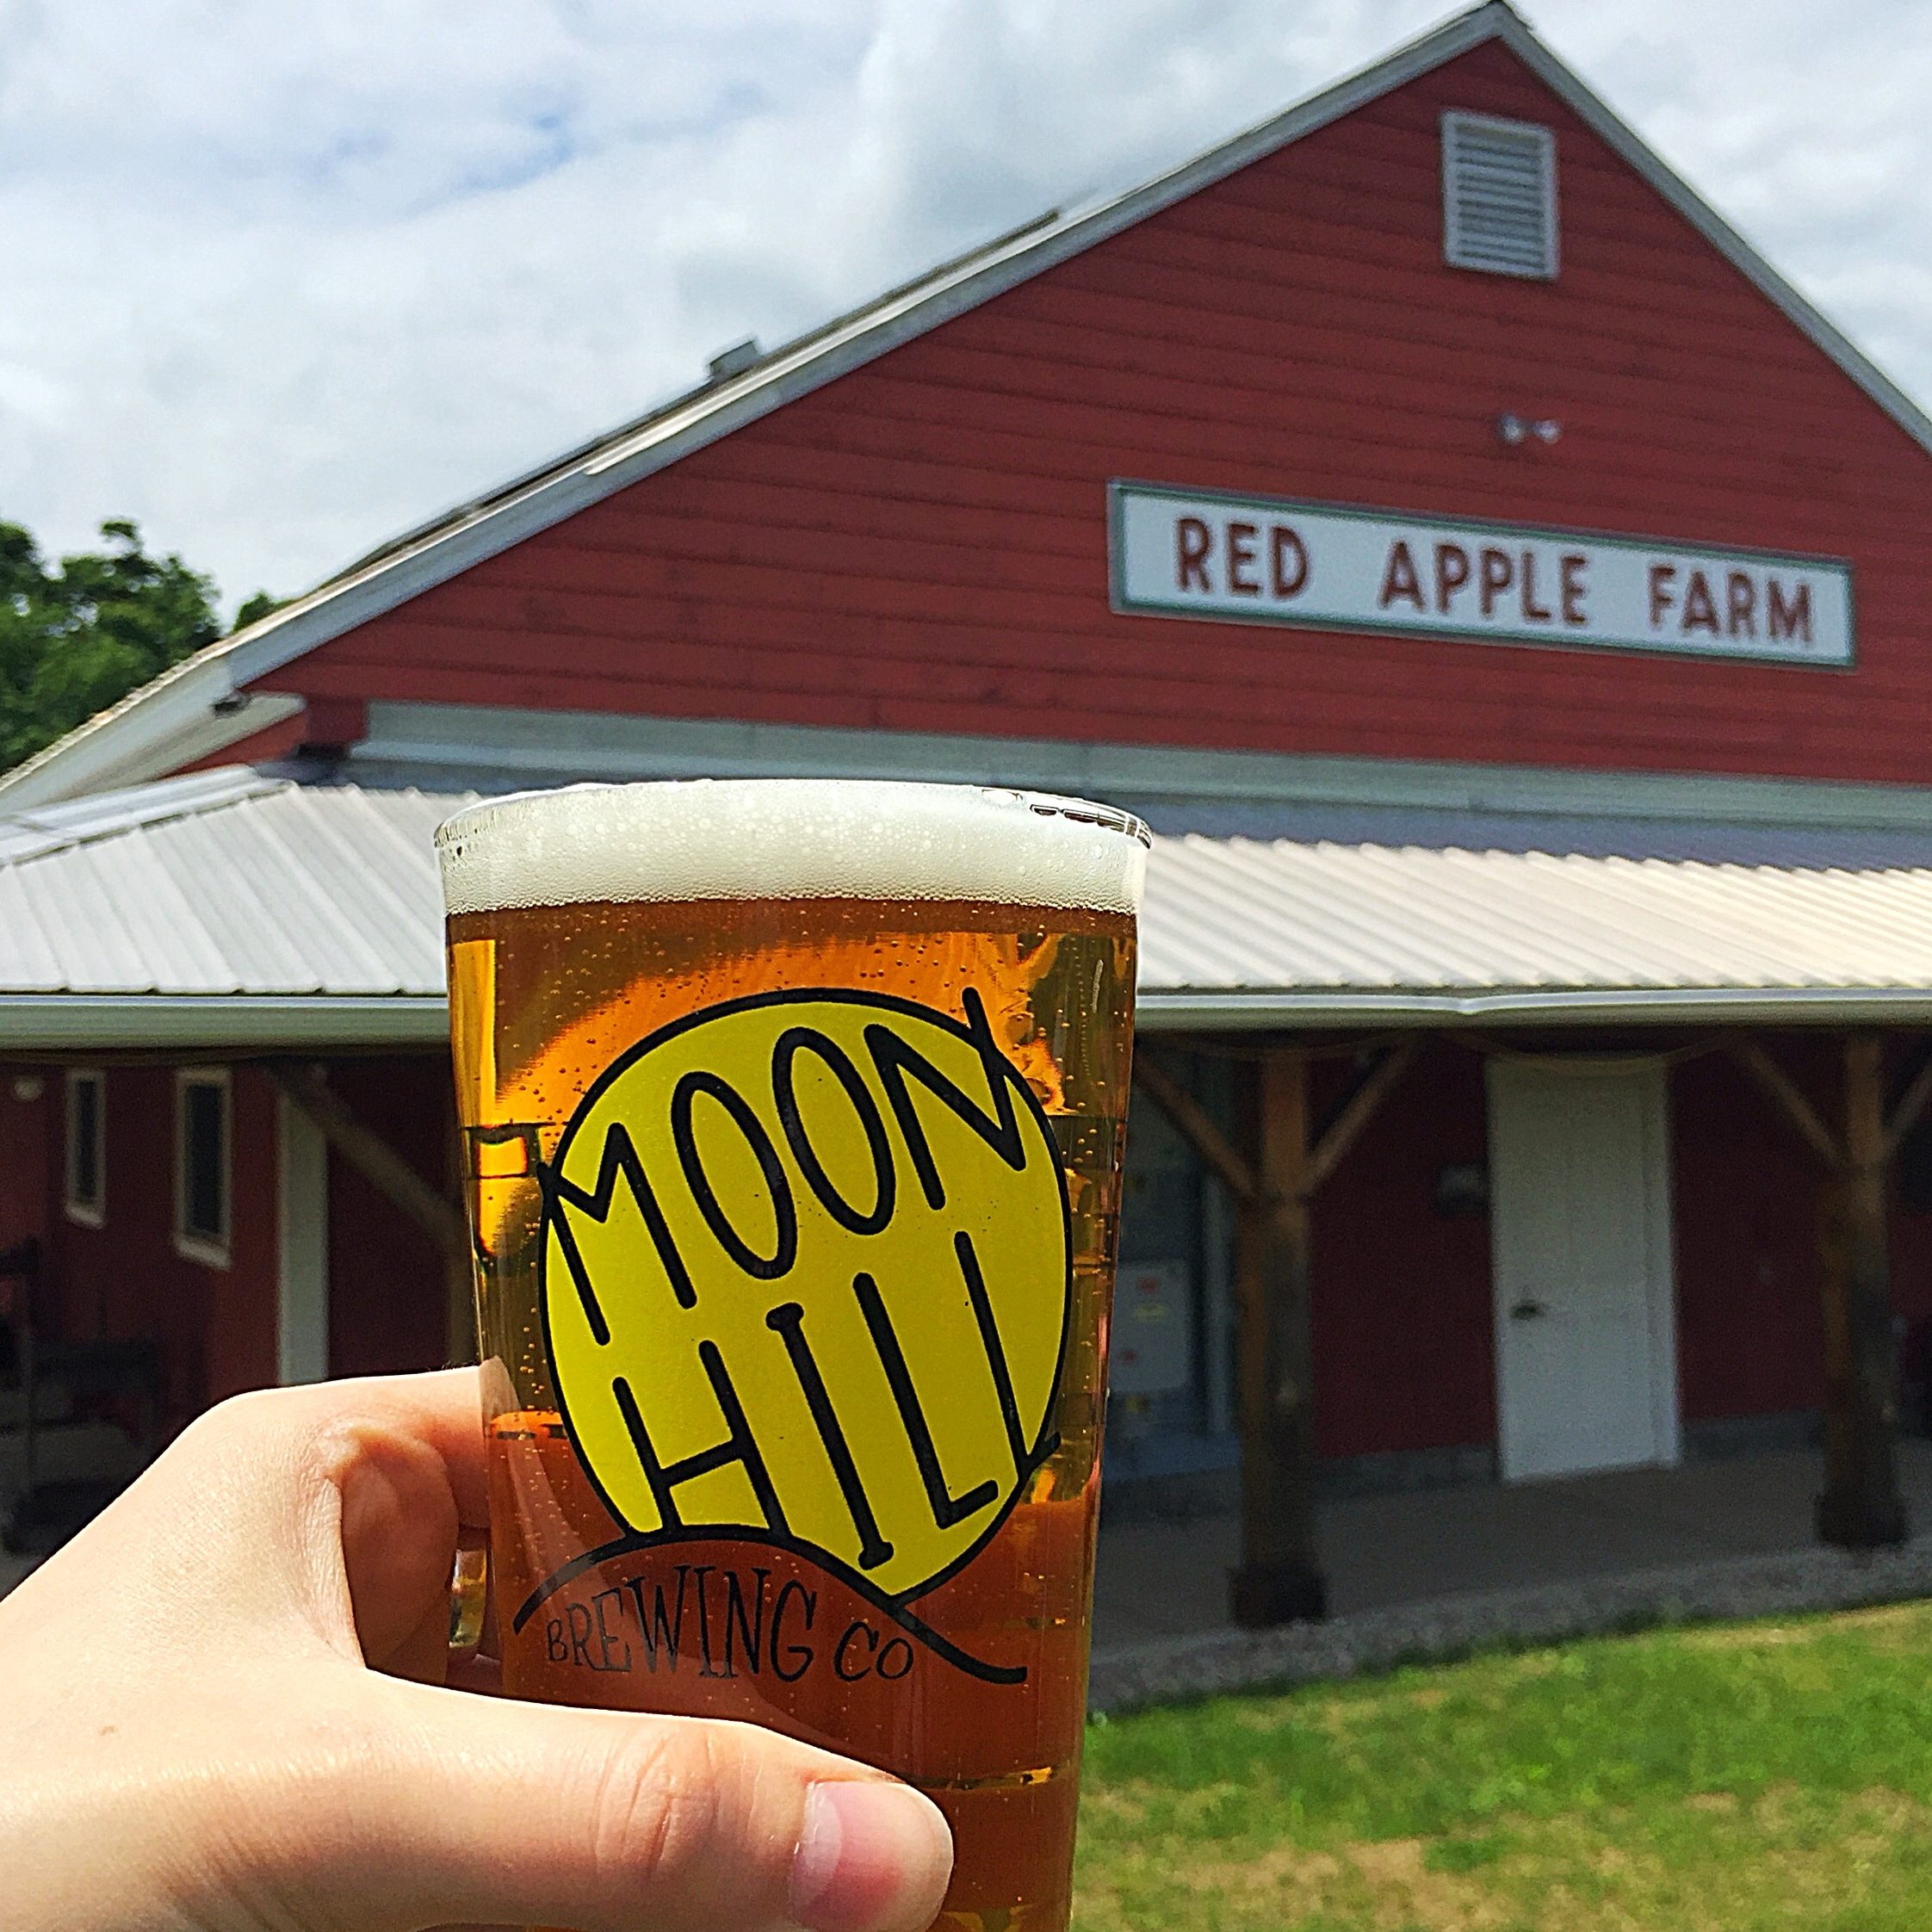 The Brew Barn: Collaboration Between Red Apple Farm and Moon Hill Brewing Company